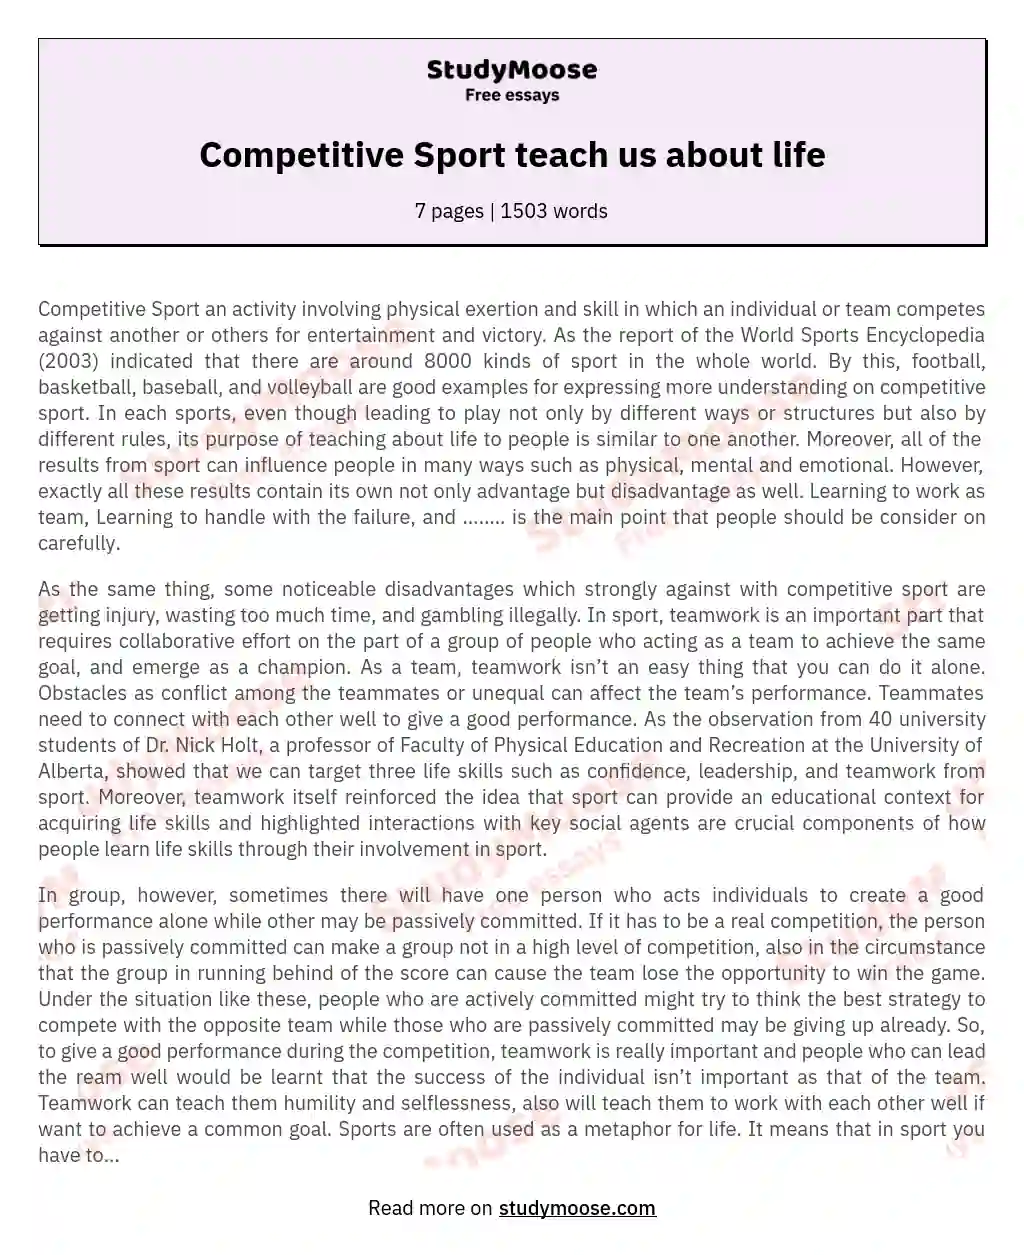 Competitive Sport teach us about life essay